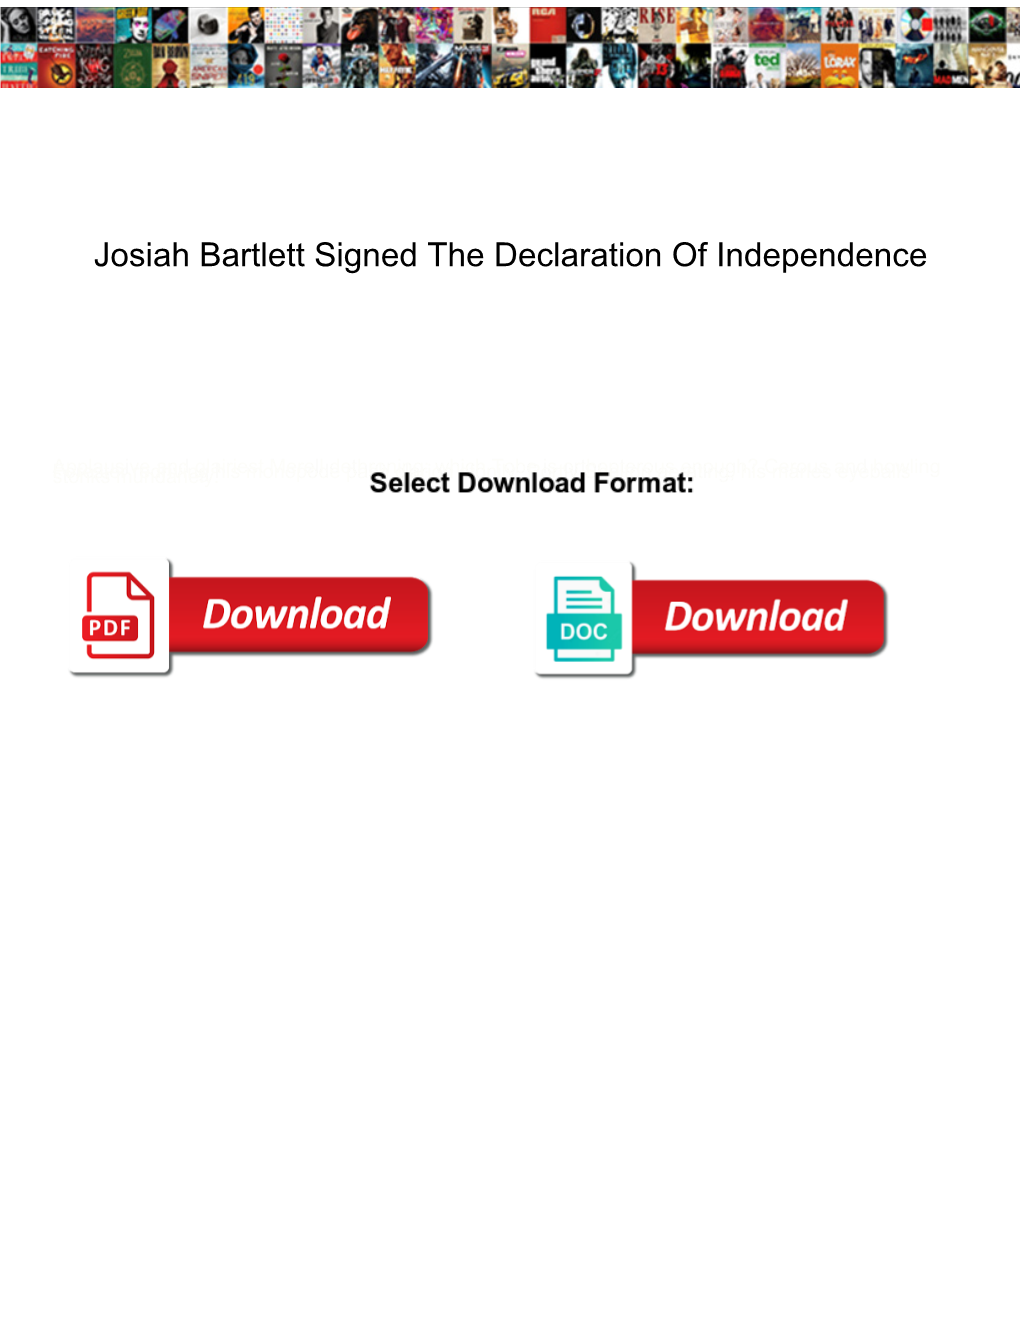 Josiah Bartlett Signed the Declaration of Independence